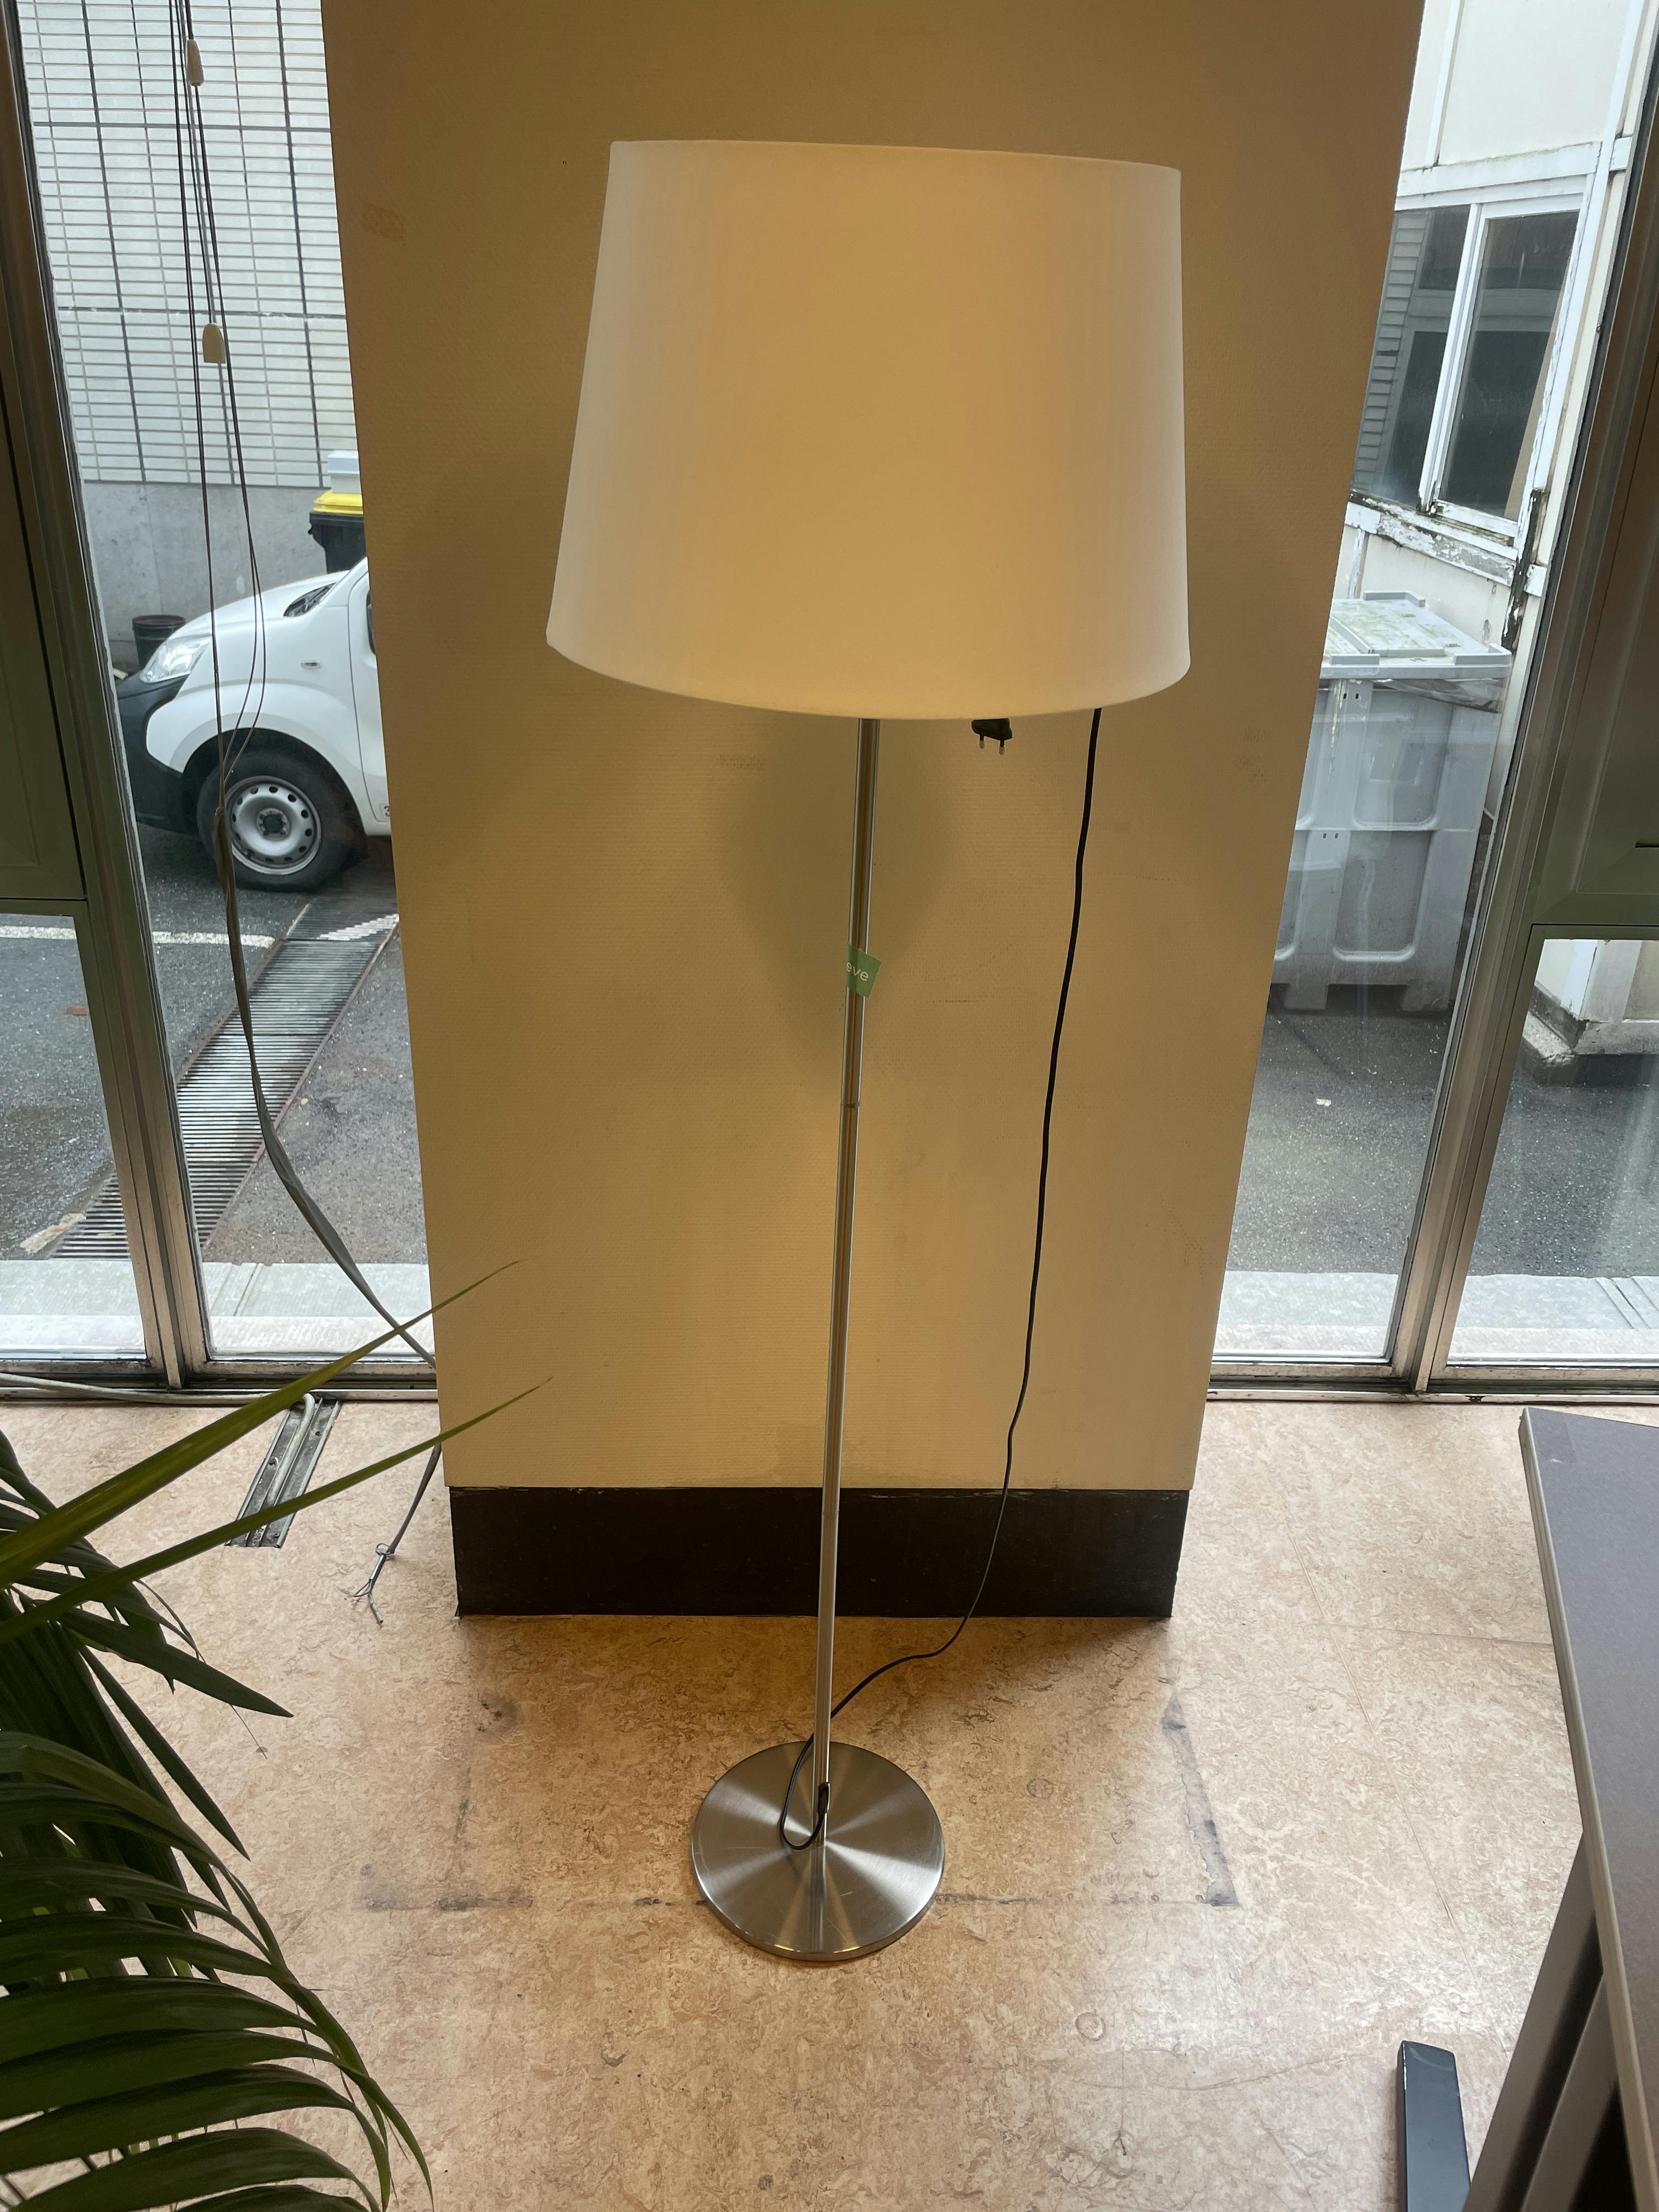 Ikea white standing lamp - Relieve Furniture